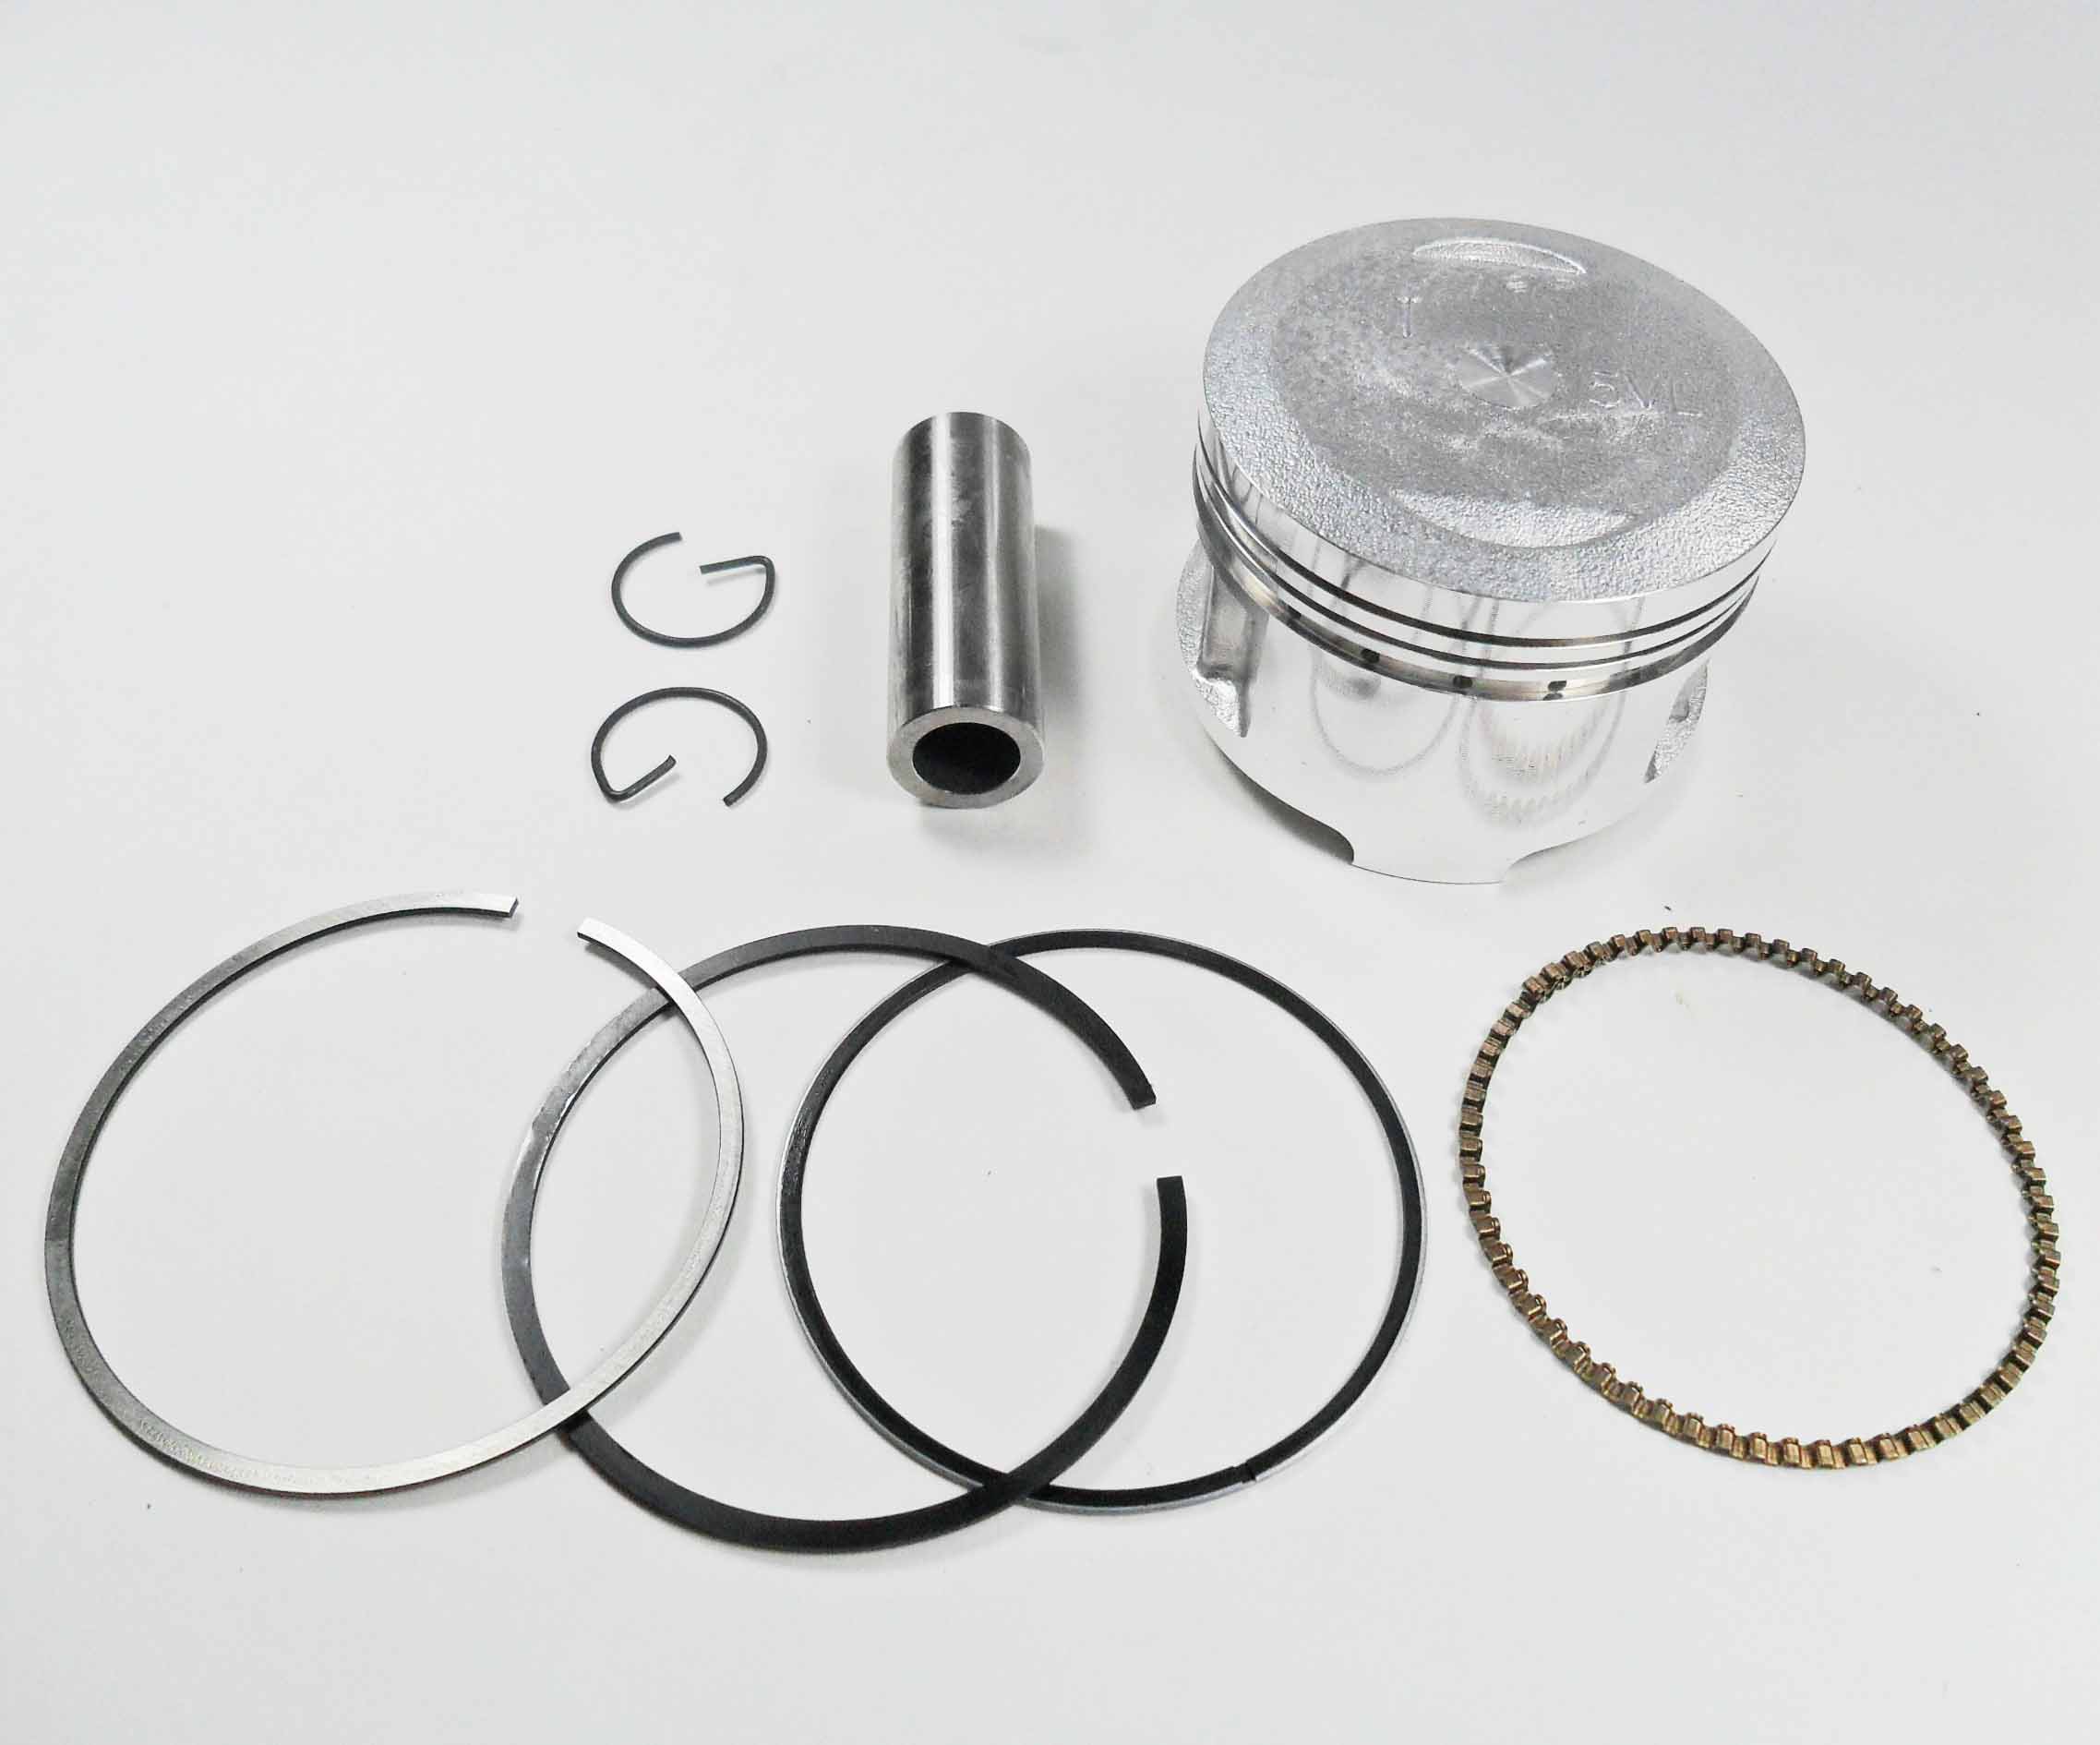 PISTON KIT 125cc GY6125 B=54 Pin=15 H=37 Ctr Pin To Top = 20mm - Click Image to Close